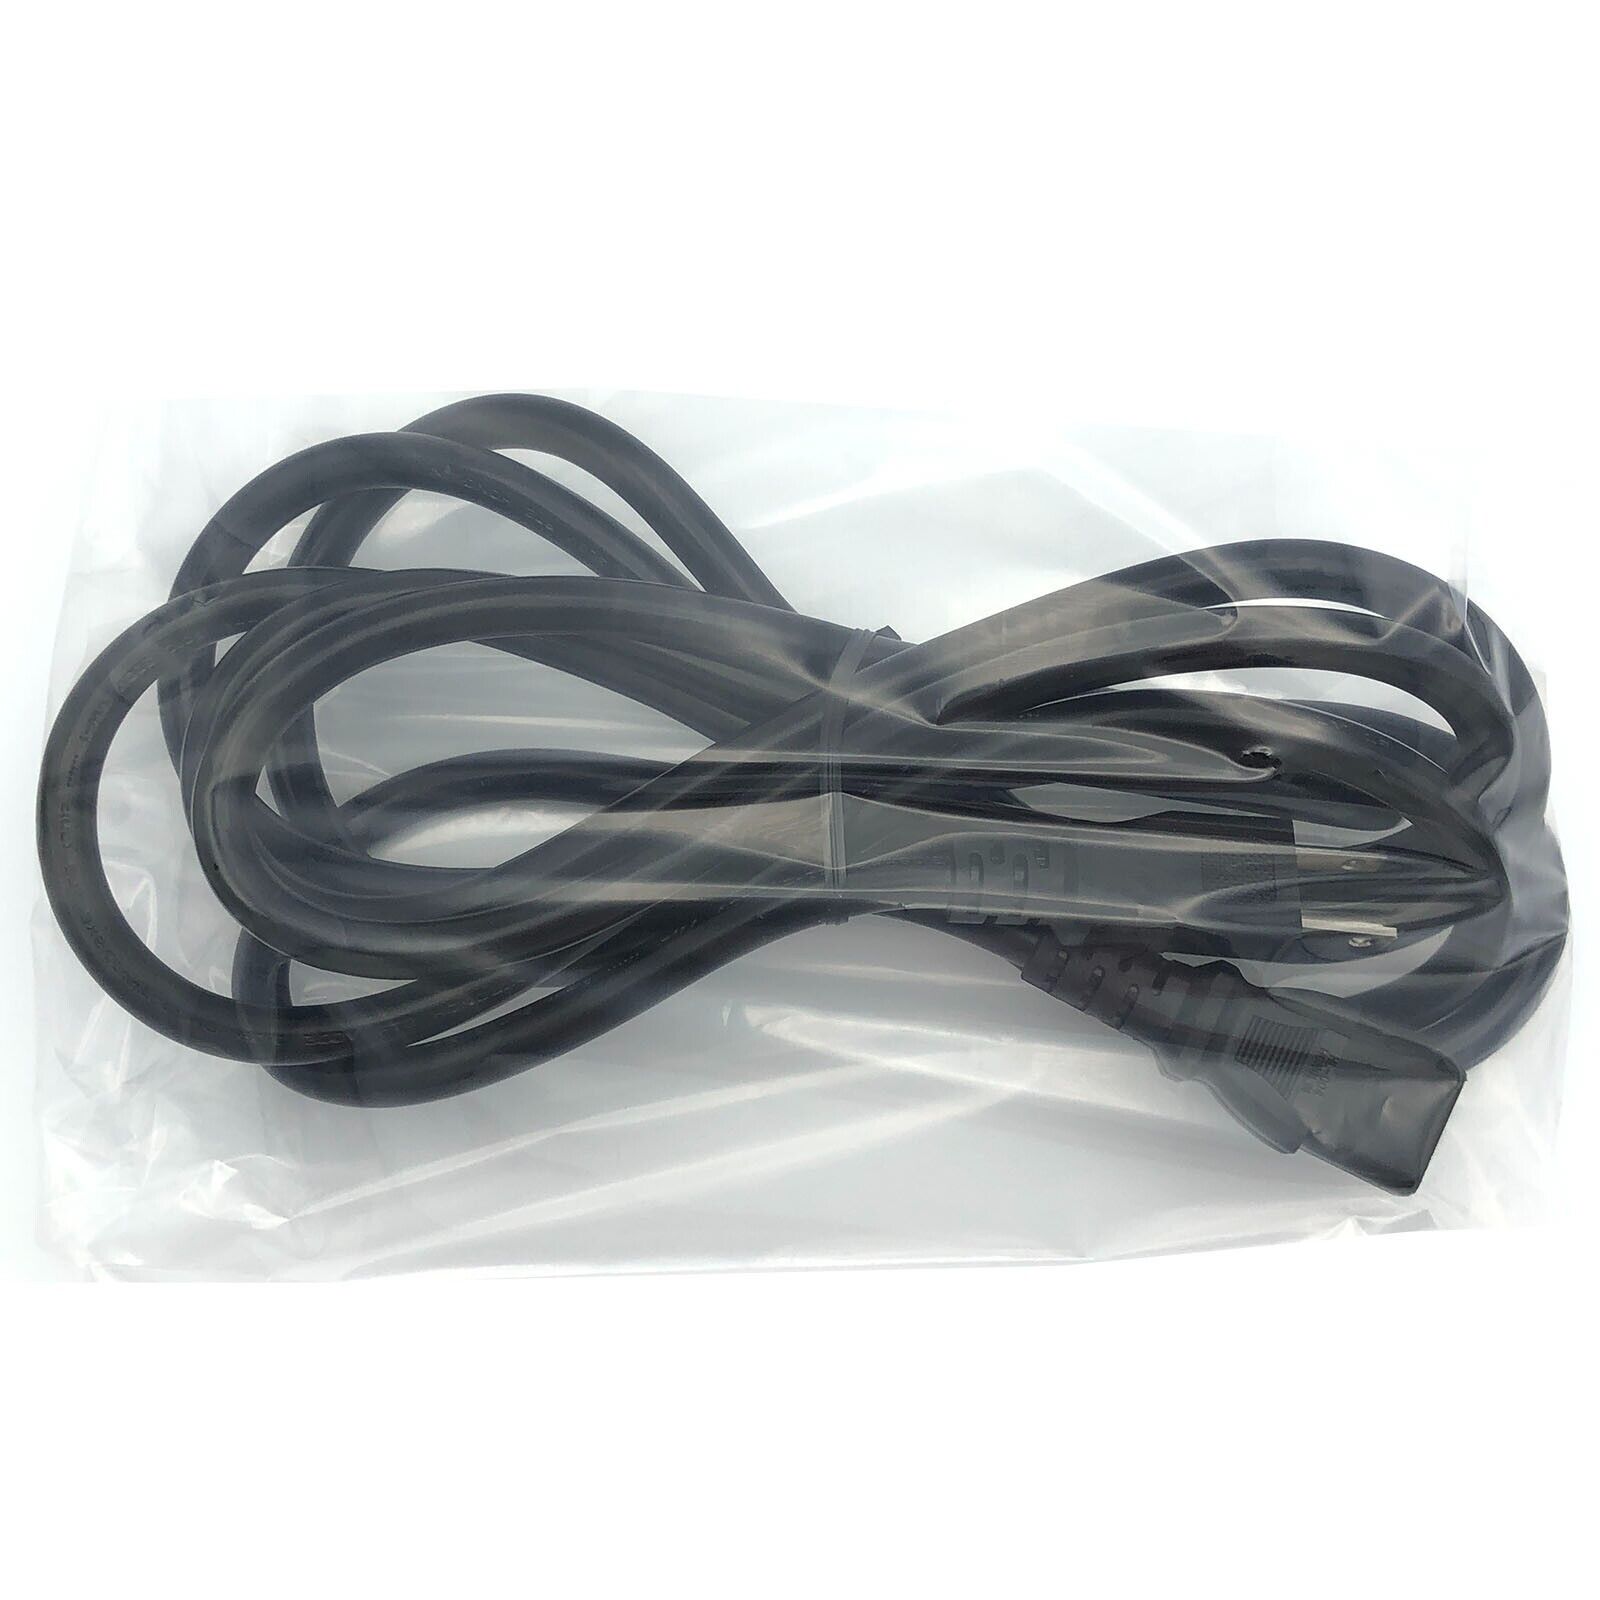 NEW 15ft UL Certified Honglin 3-Prong Power Cable 125V 15A NEMA 5-15P to C13